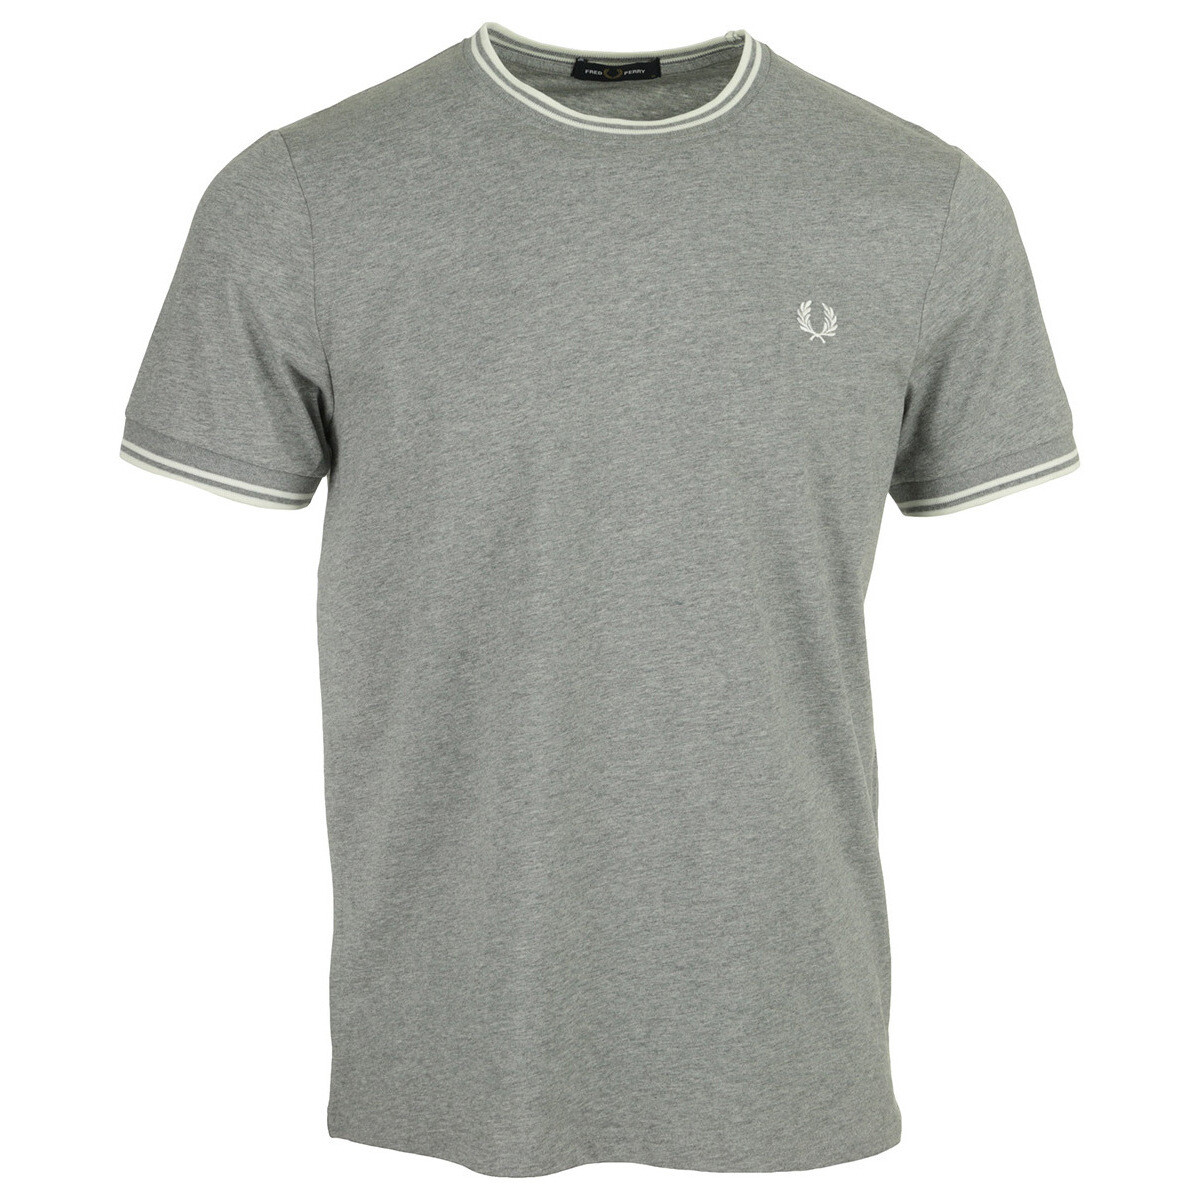 Vêtements Homme T-shirts manches courtes Fred Perry Twin Tipped Noir